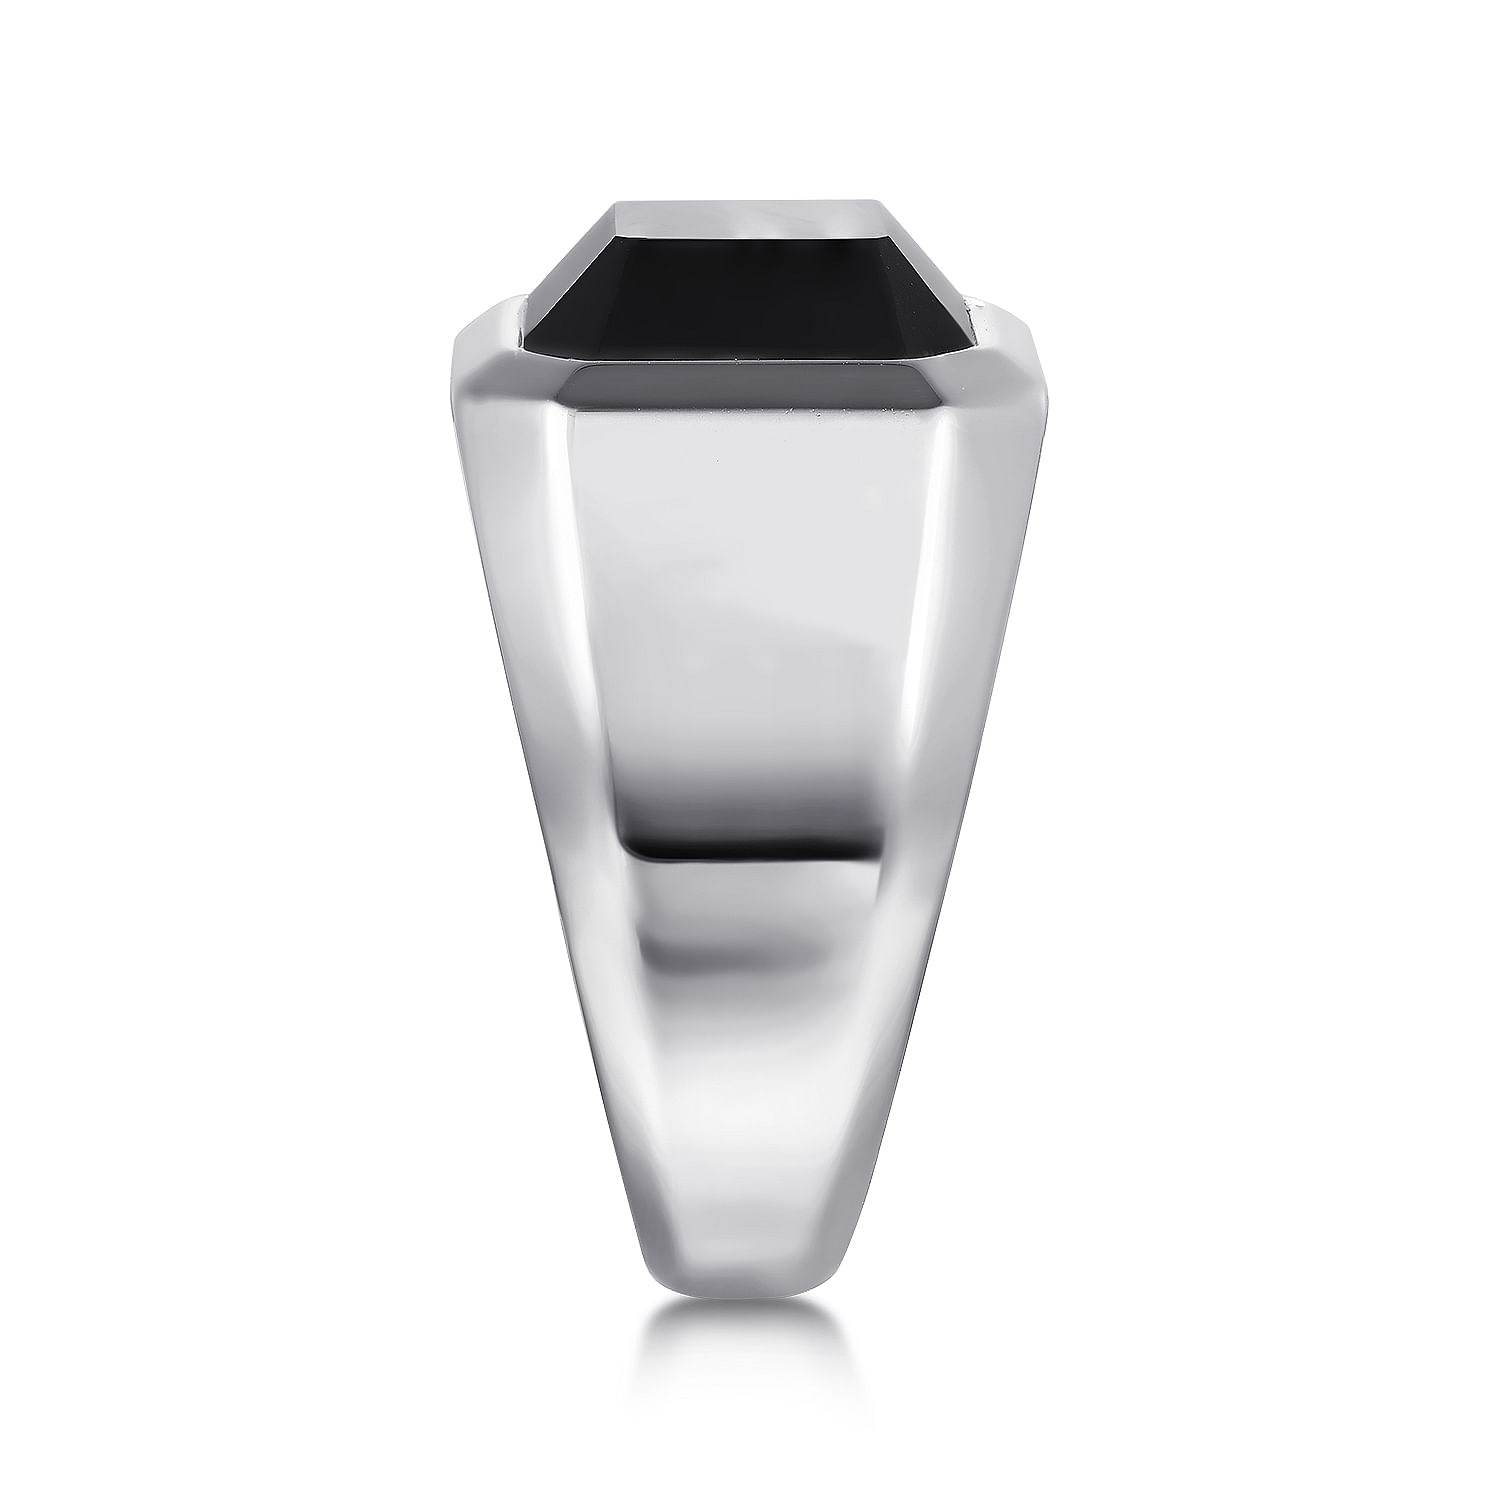 Wide 925 Sterling Silver Signet Ring with Faceted Onyx Stone in Sand Blast Finish